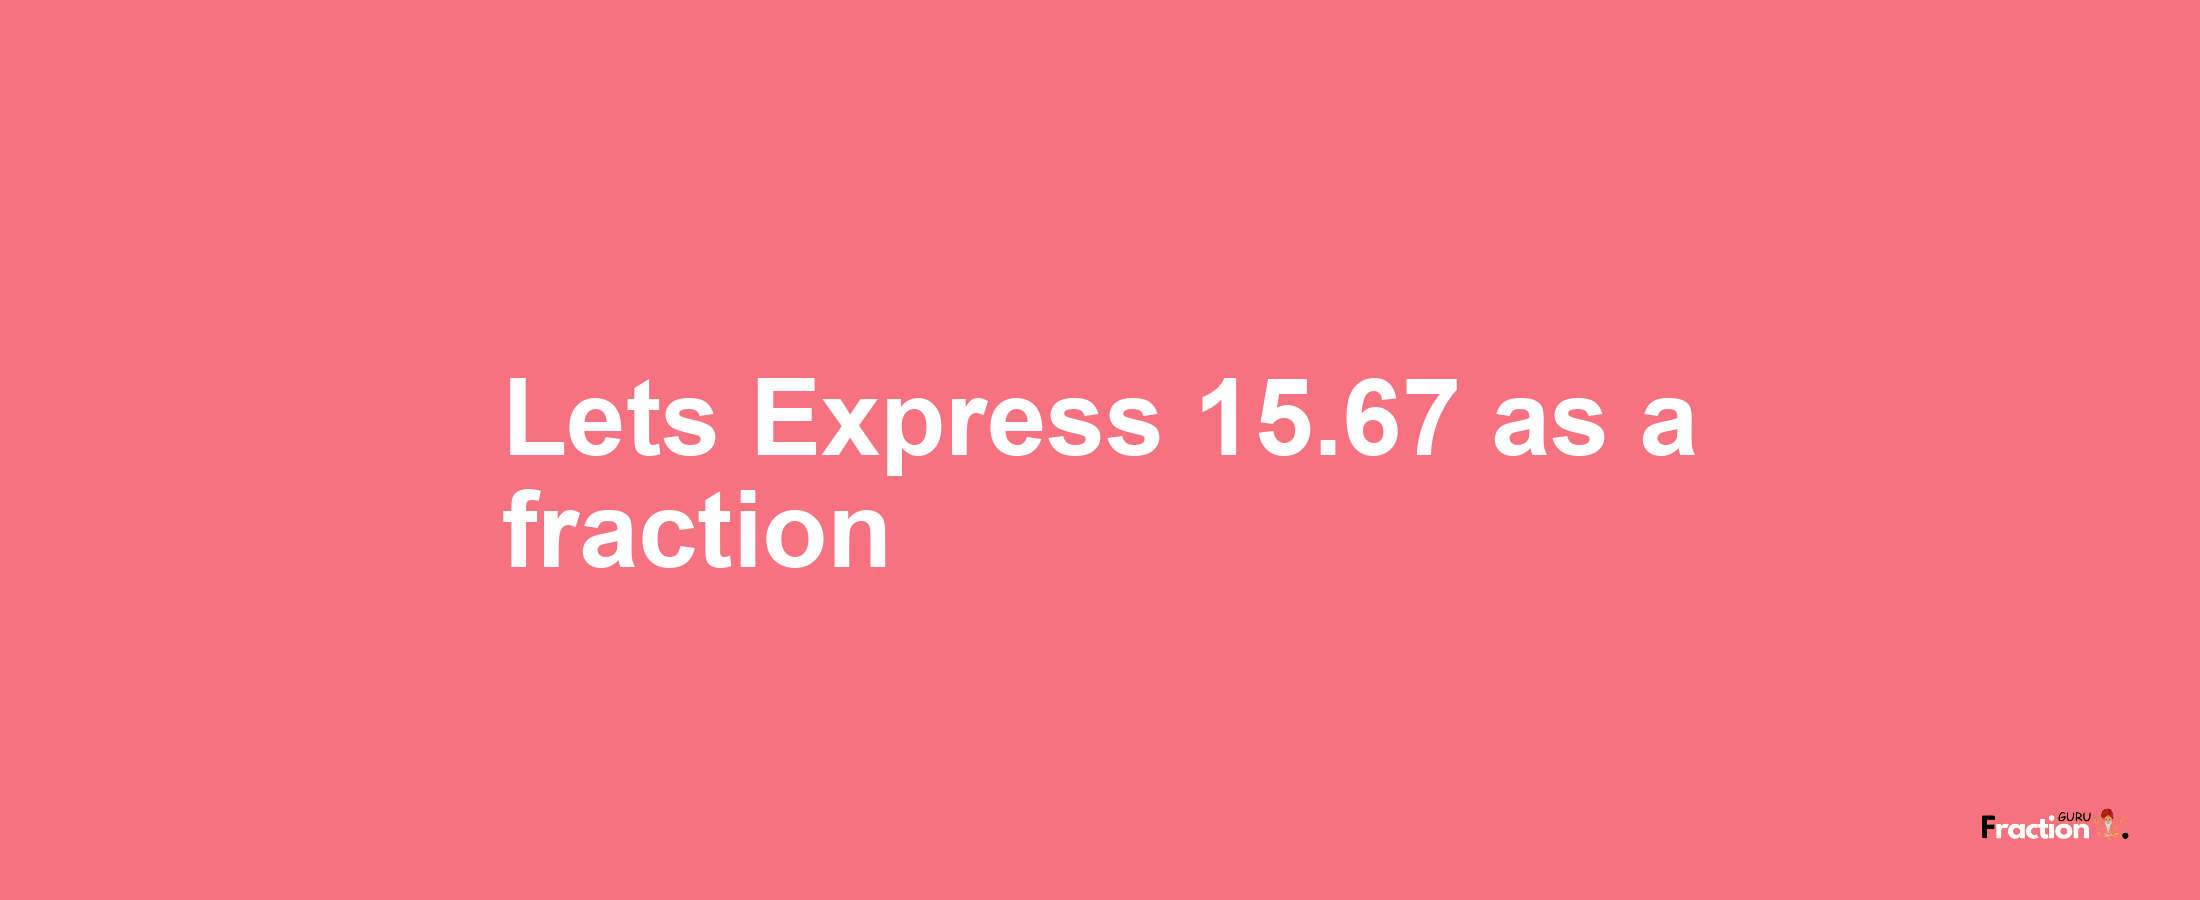 Lets Express 15.67 as afraction